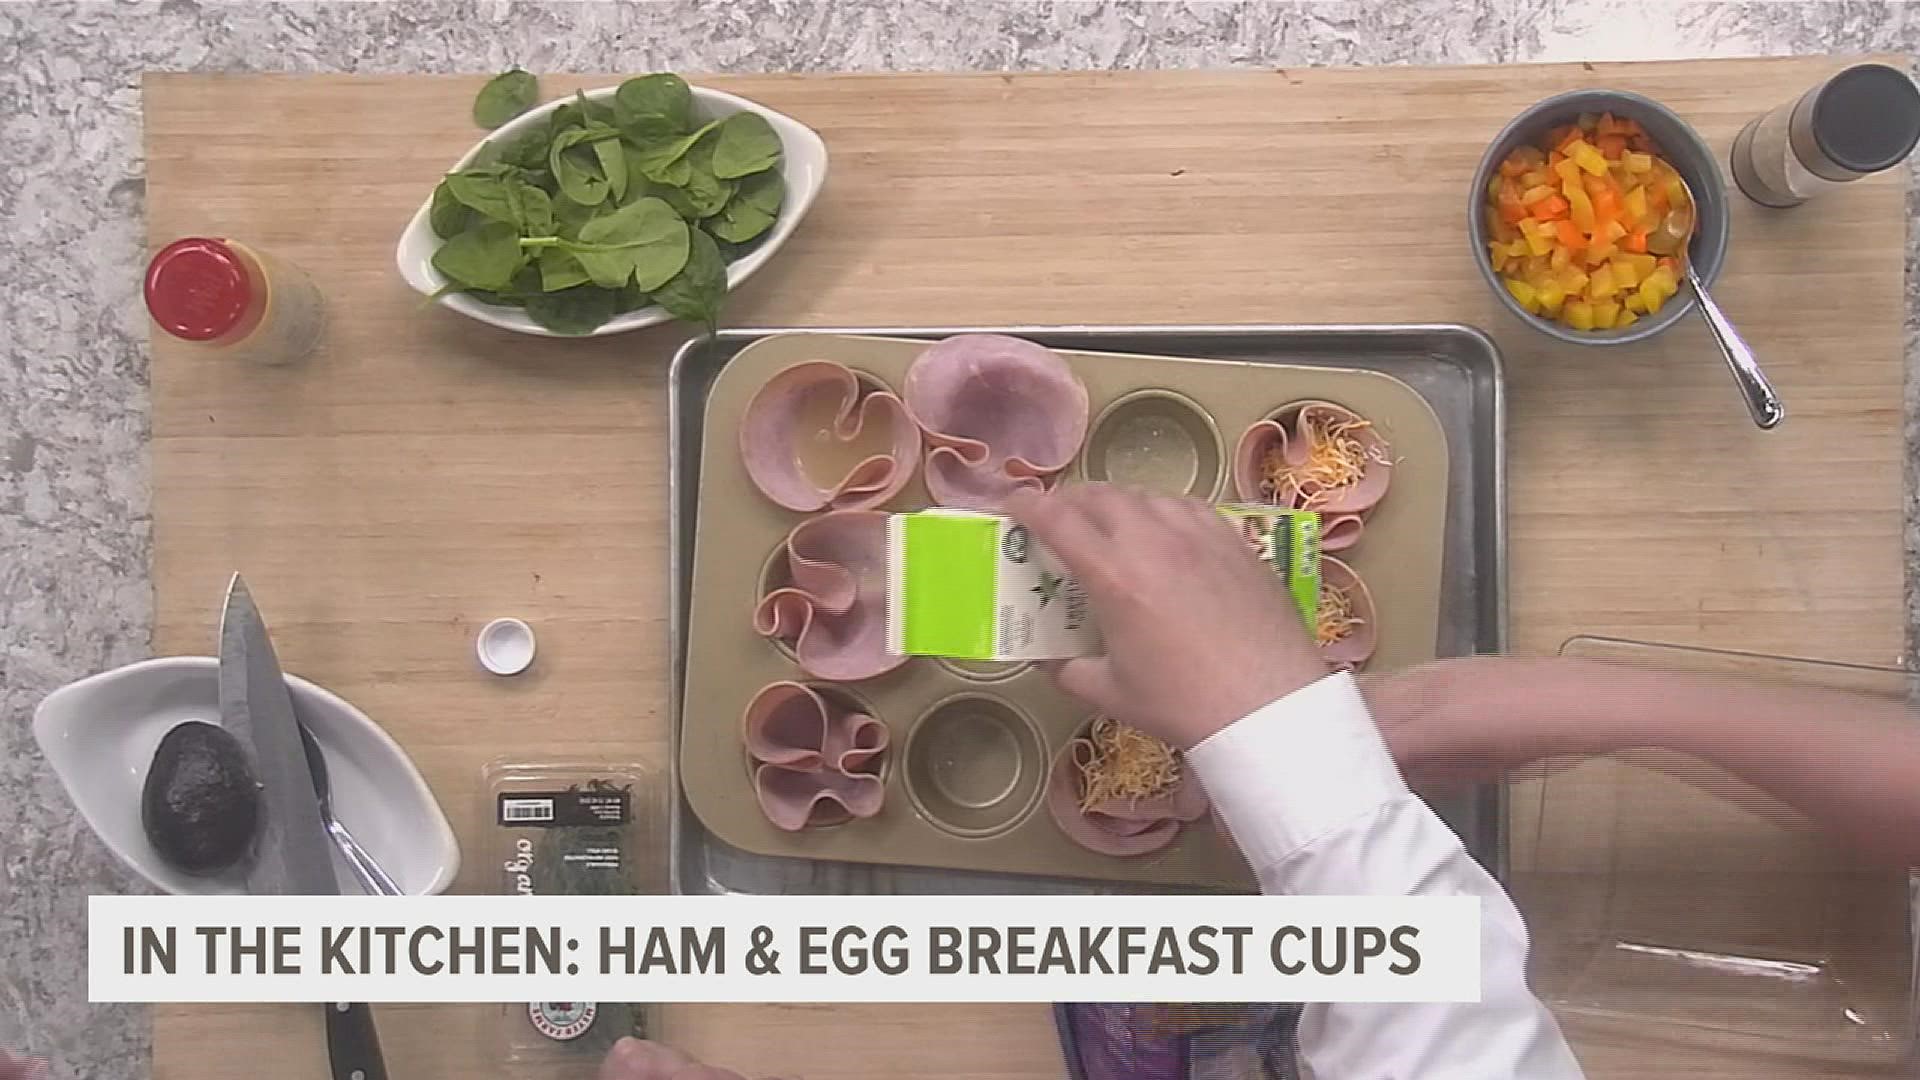 These ham and egg breakfast cups are healthy, delicious and easy for those on the go in the morning!